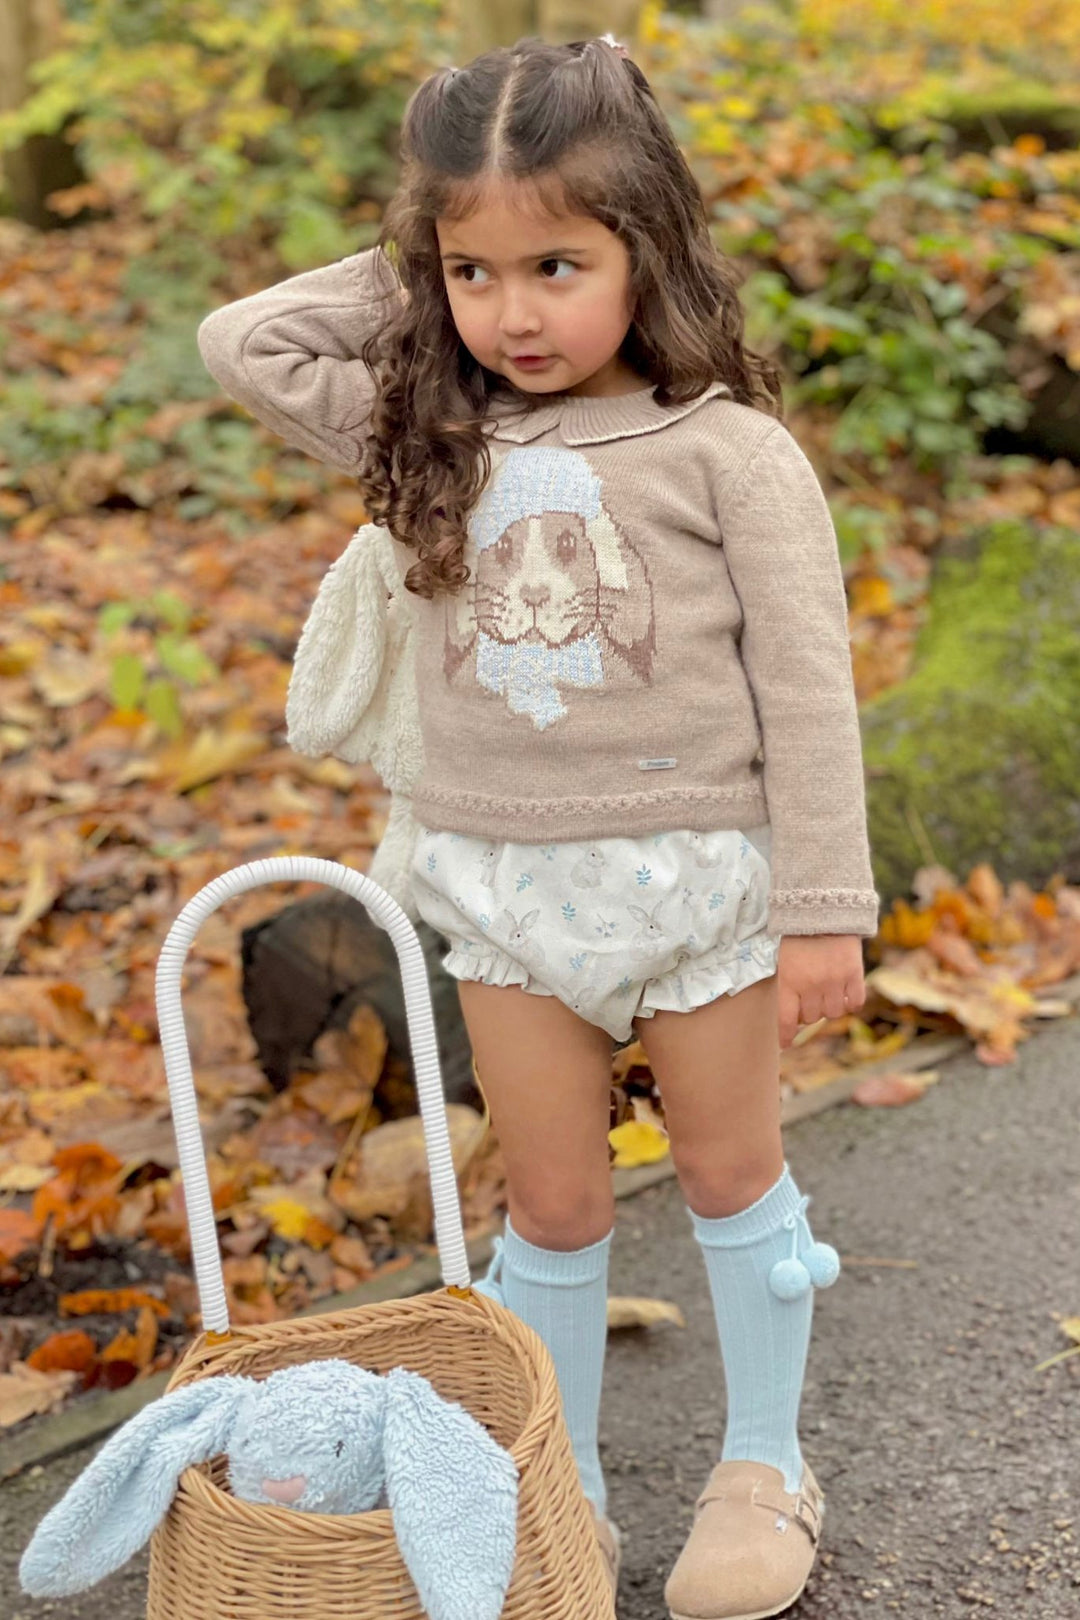 Foque "Faith" Taupe Knit Bunny Top & Bloomers | Millie and John